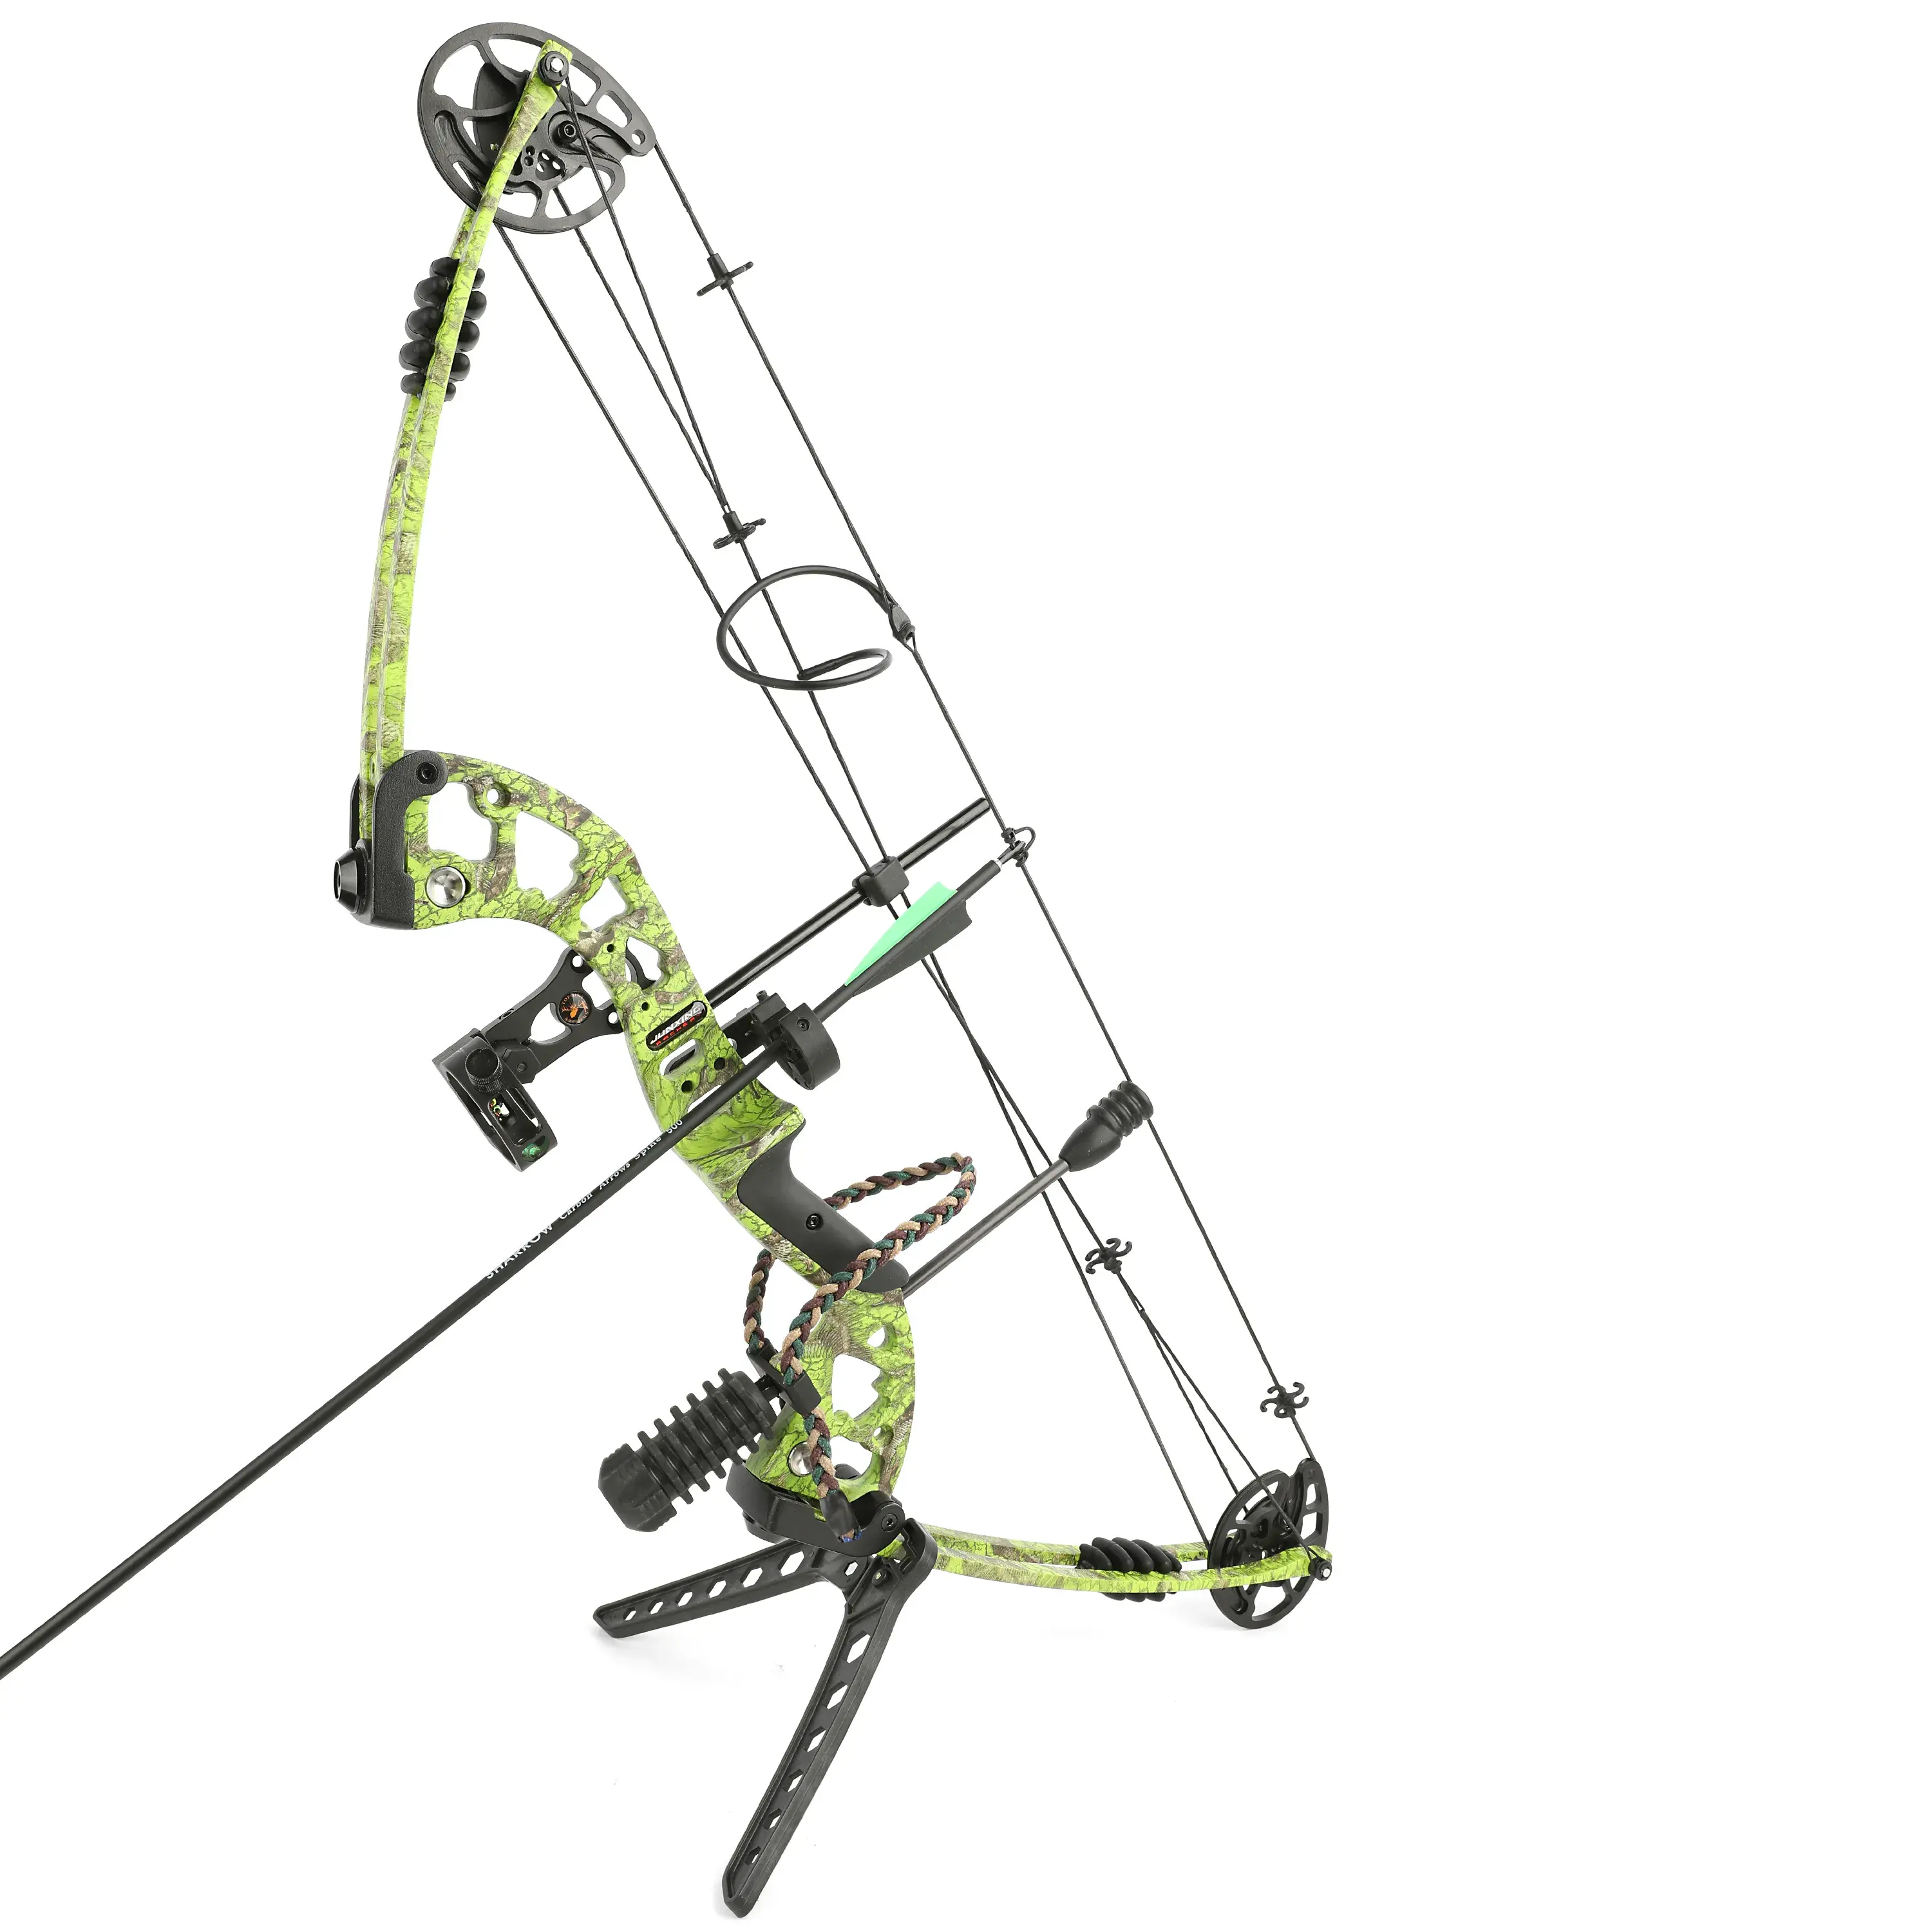 CenterPoint Typhon X1 Bowfishing Compound Bow Package - 733032, Bowfishing  at Sportsman's Guide